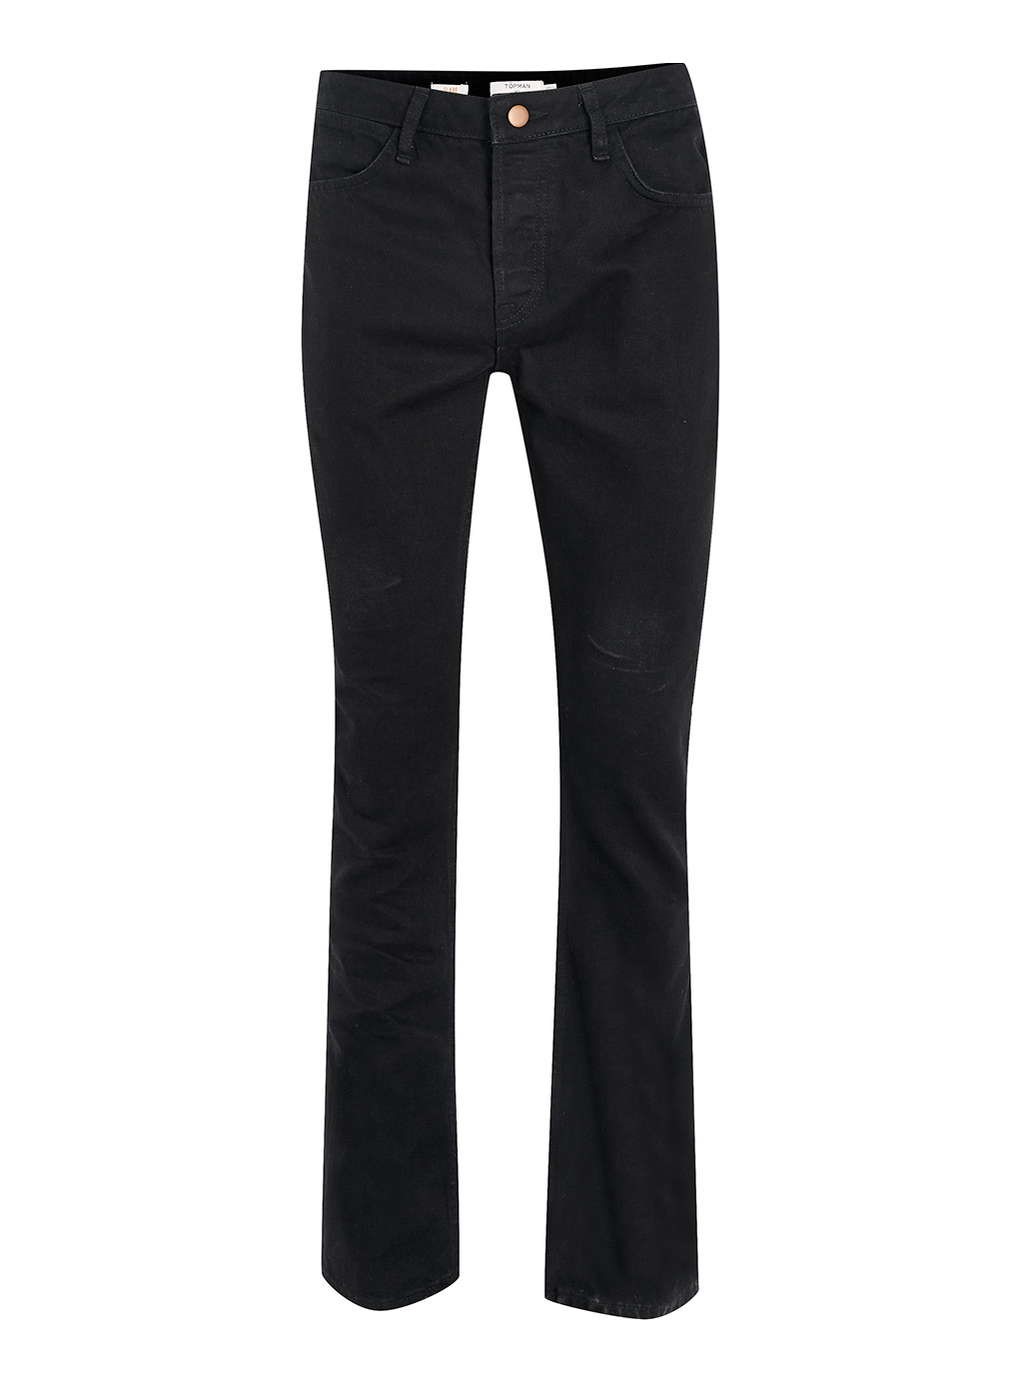 Topman Solid Black Raw Flare Jeans, £38